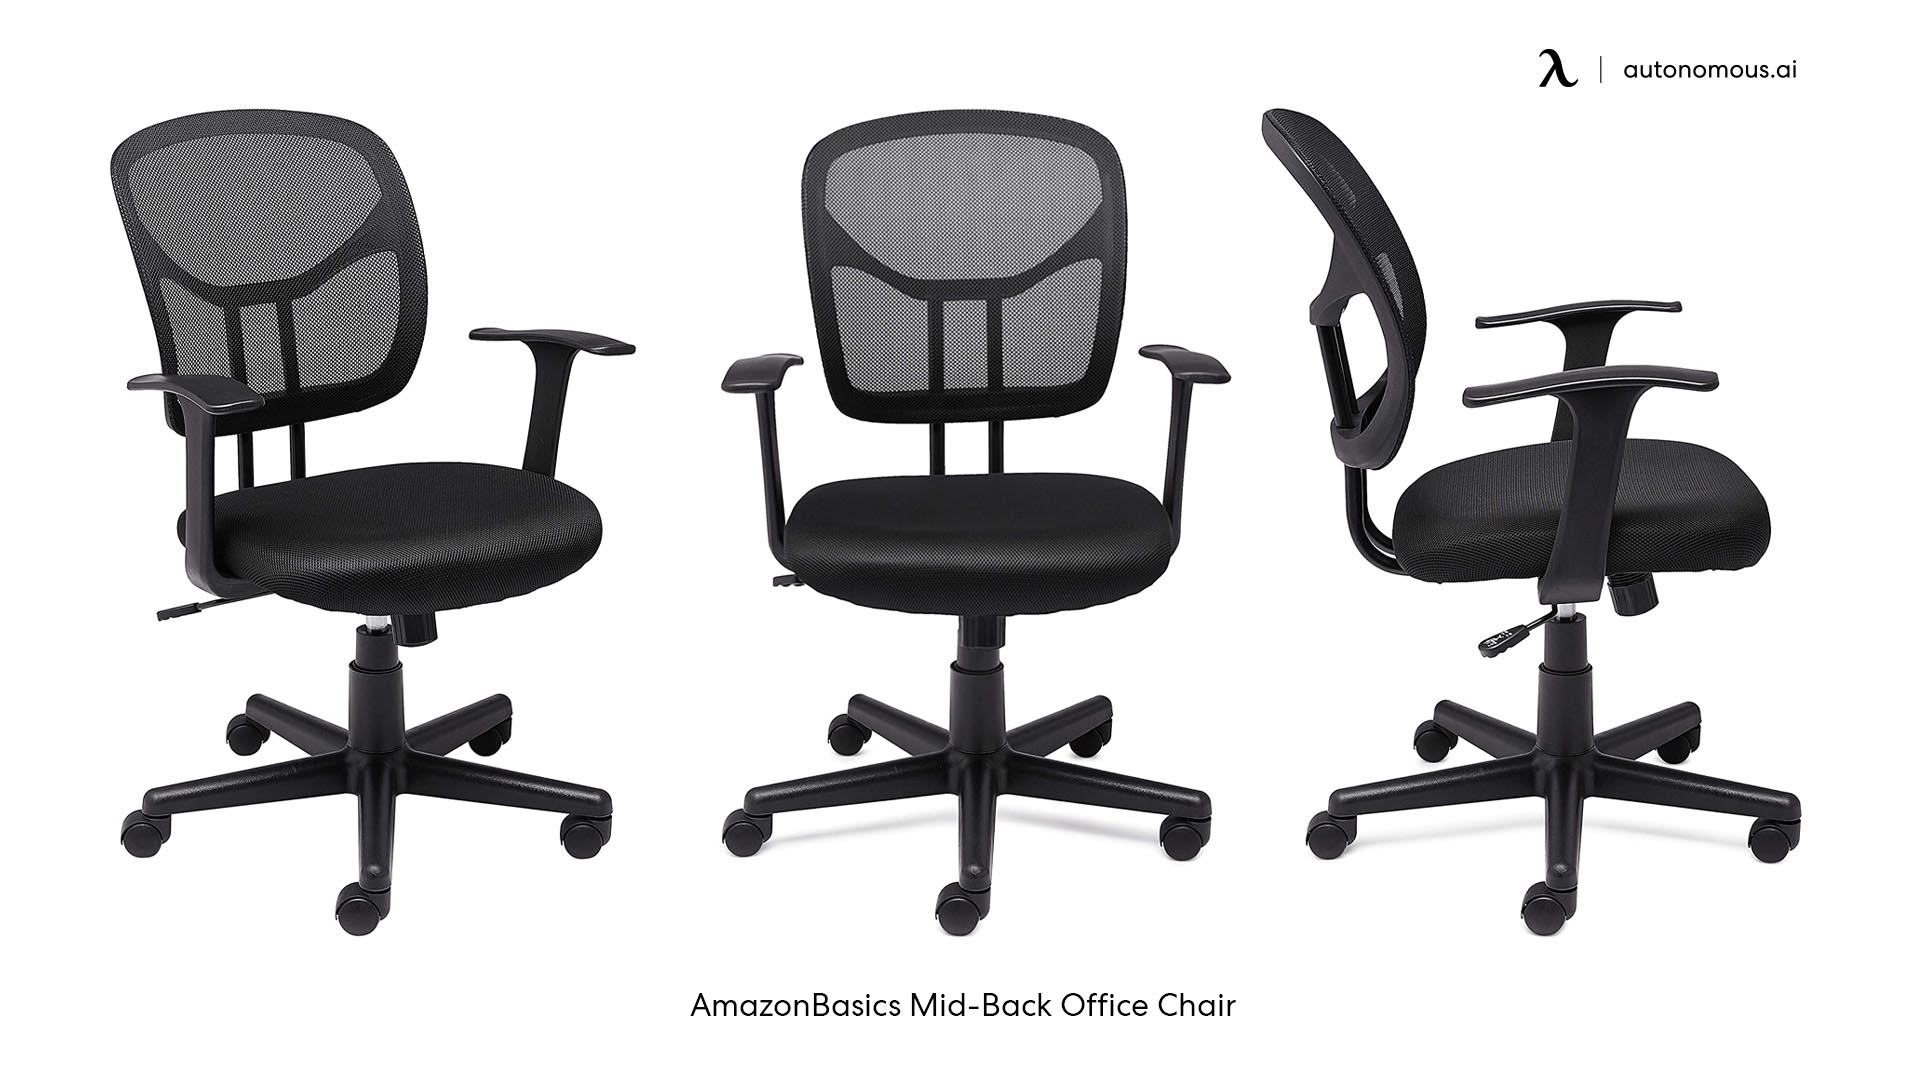 AmazonBasics conference chairs with wheels